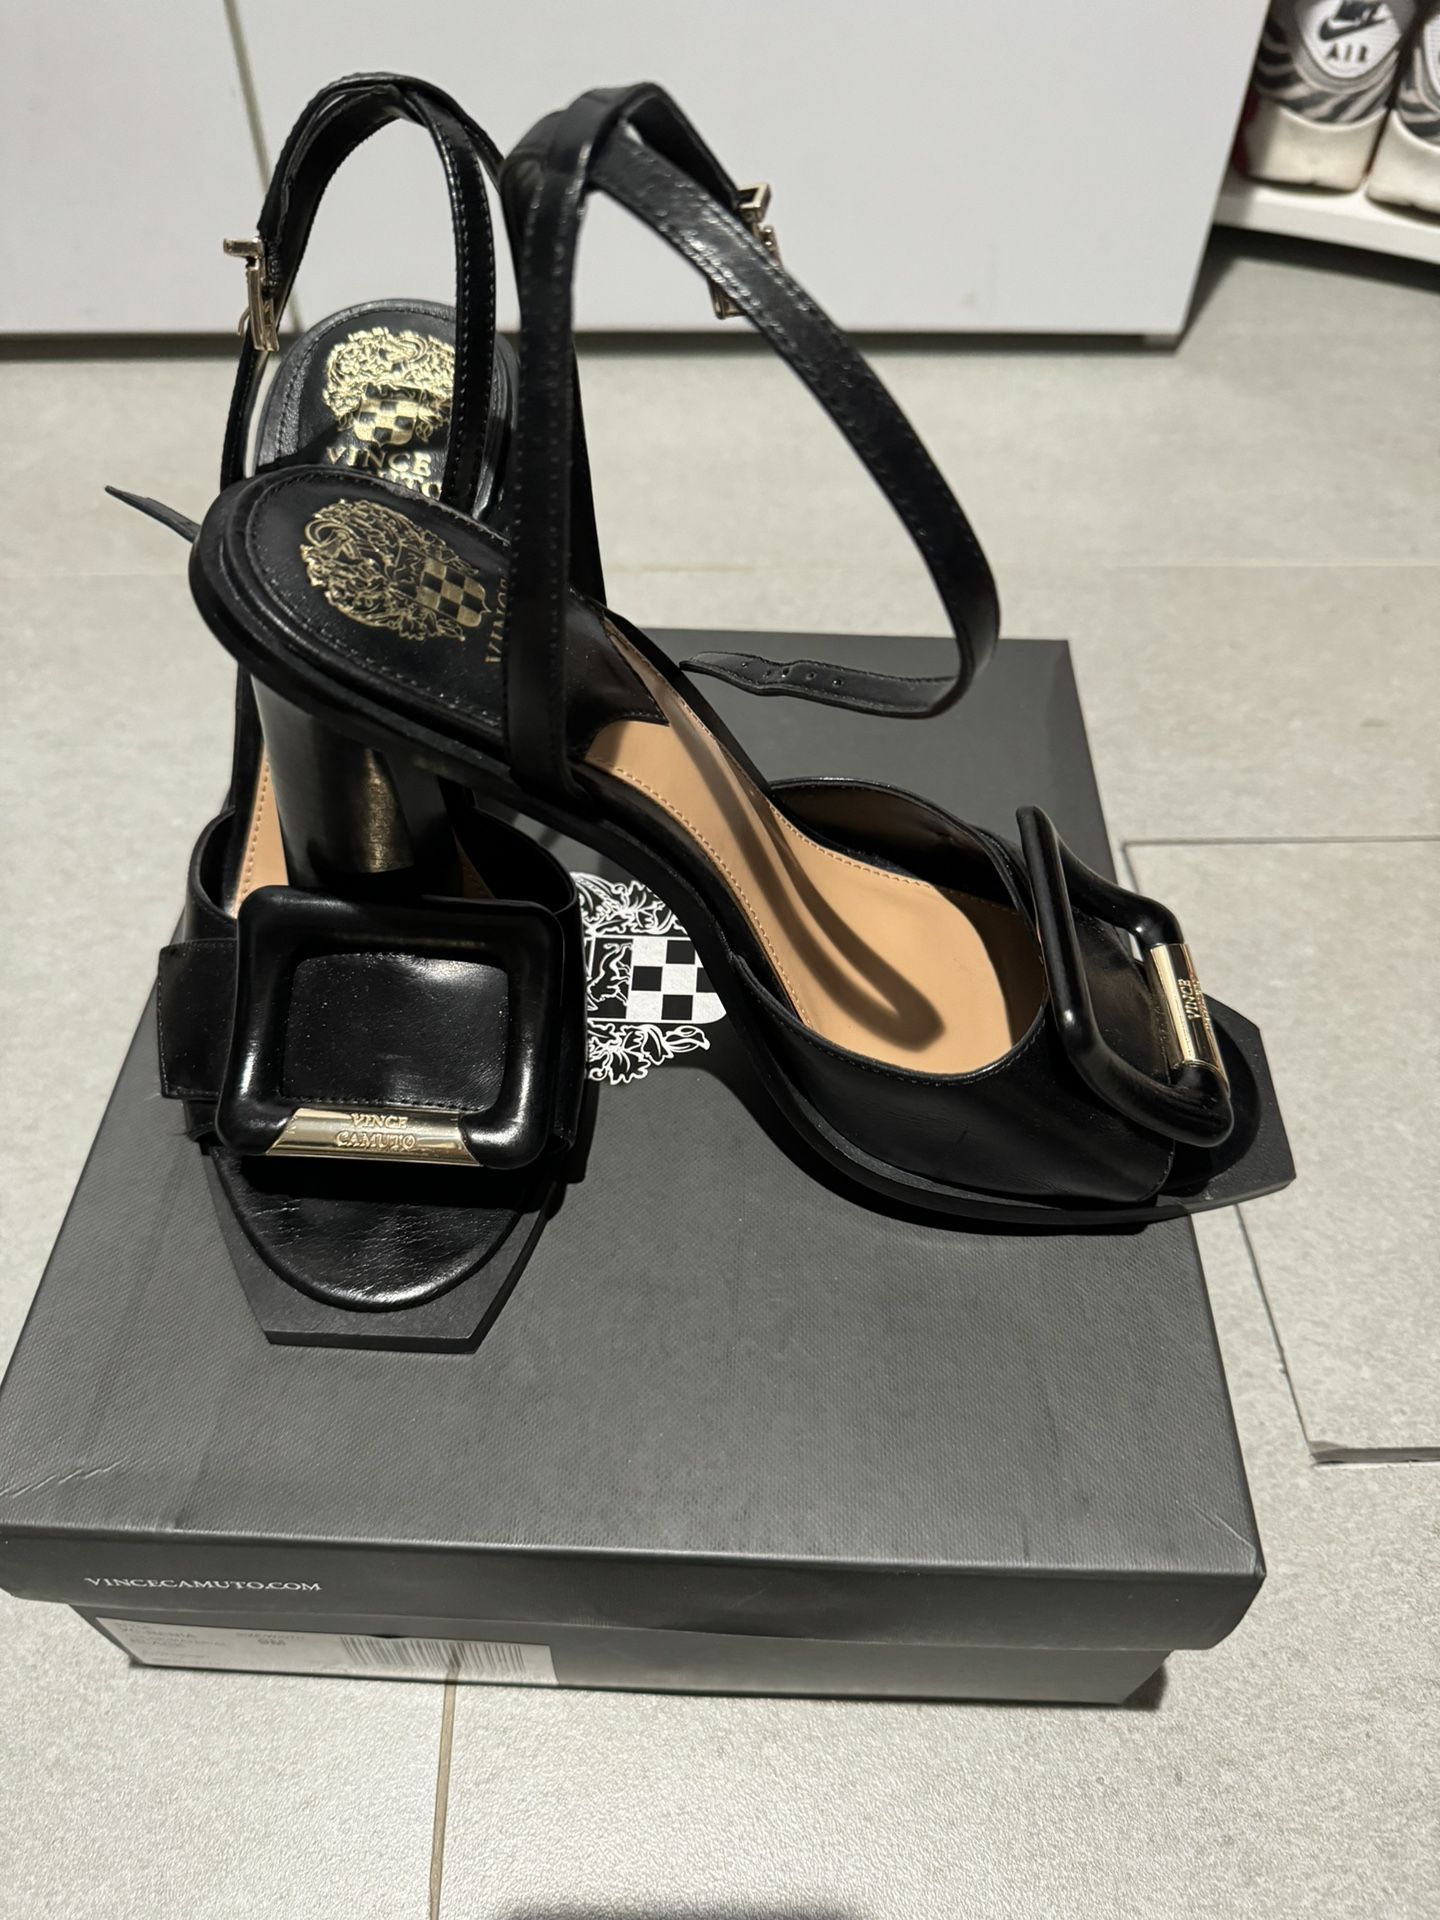 Vince Camuto Heels ! New In Box 